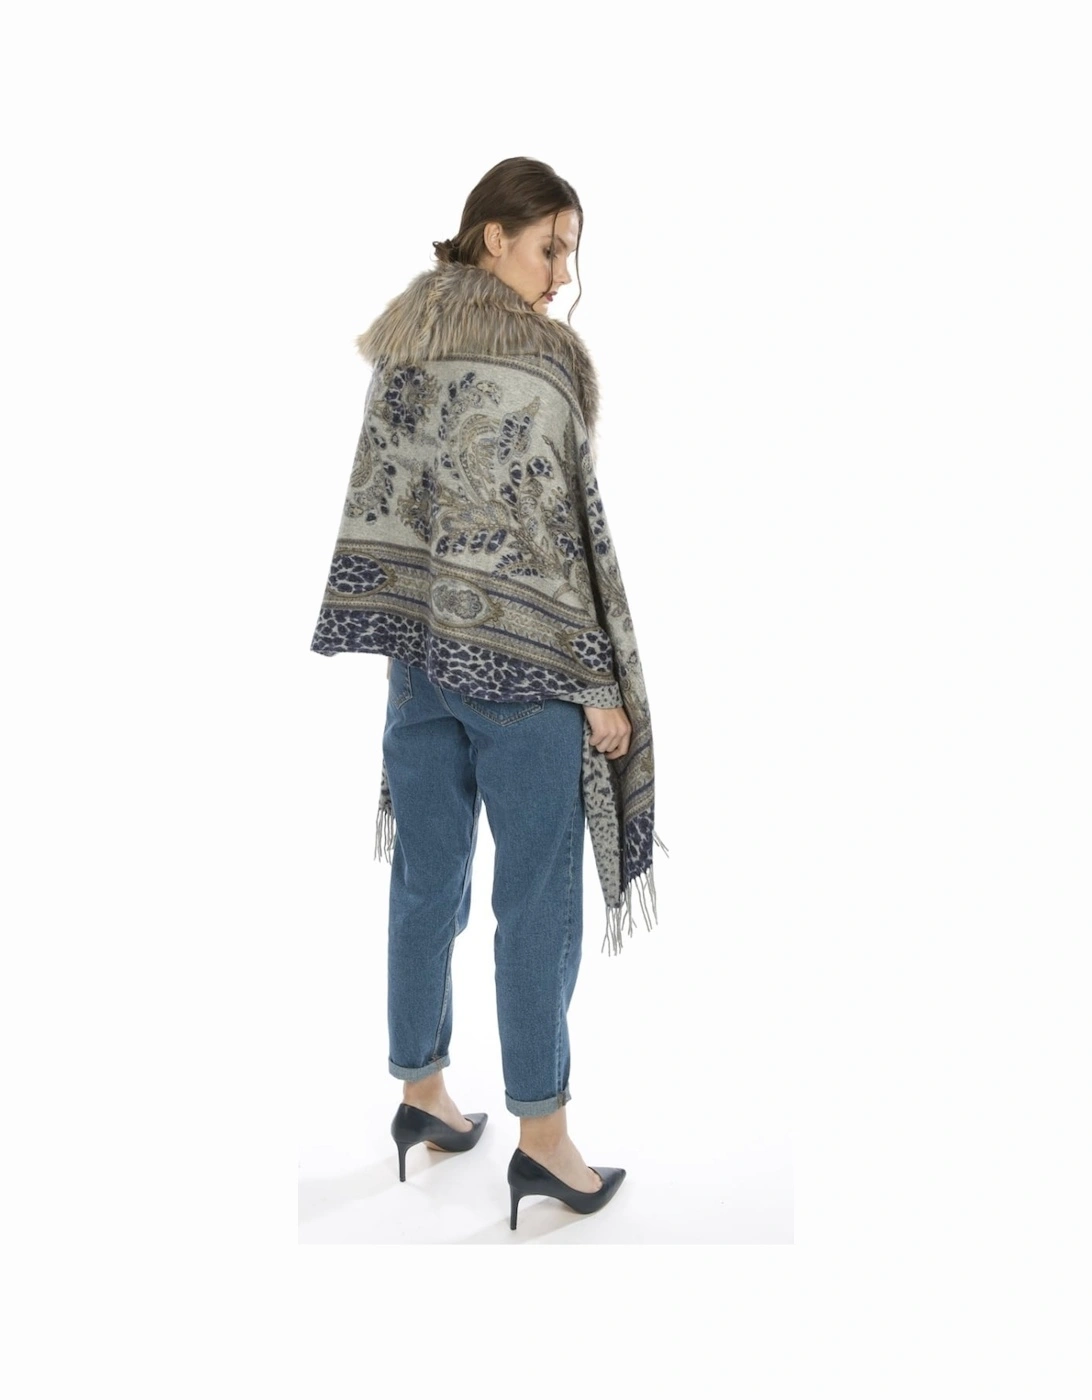 Blue Animal Print Cashmere Wrap with Faux Fur Collar